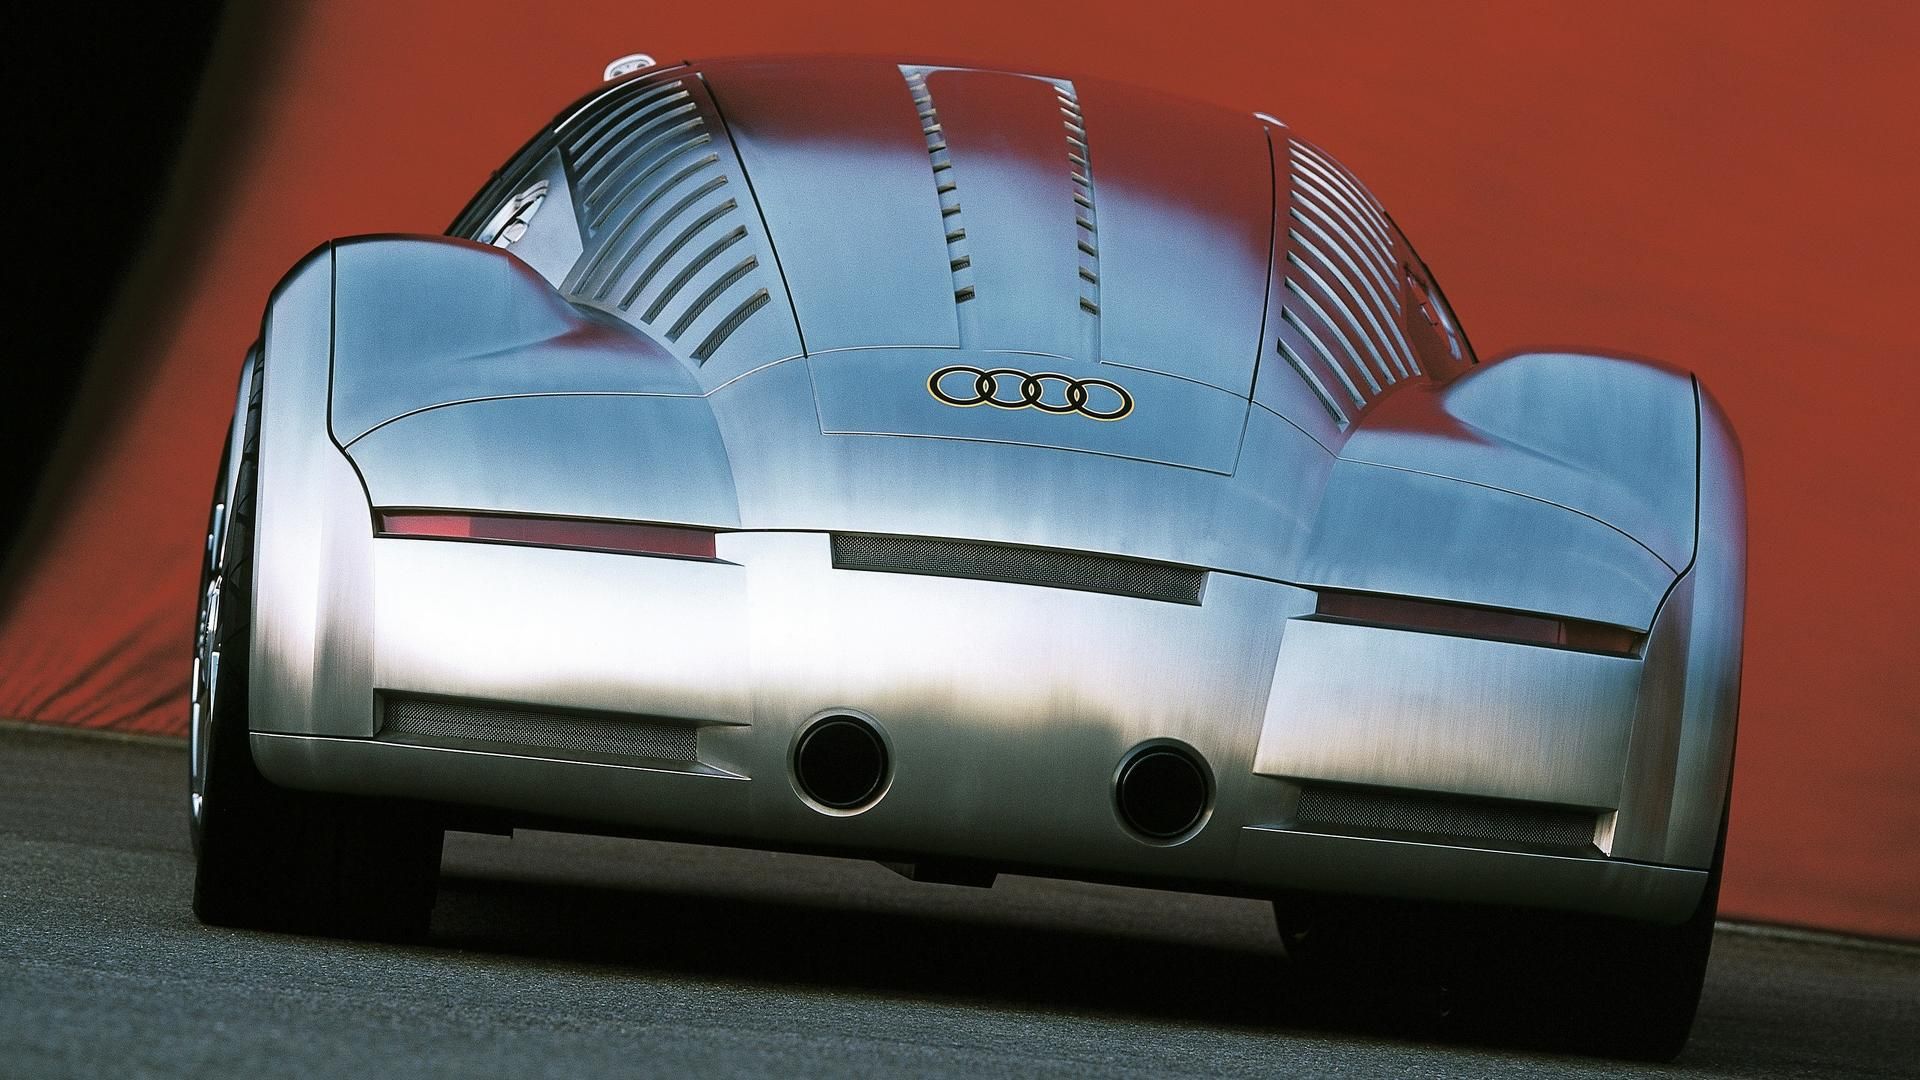 The Audi Rosemeyer packs a W16 engine with 700 bhp.